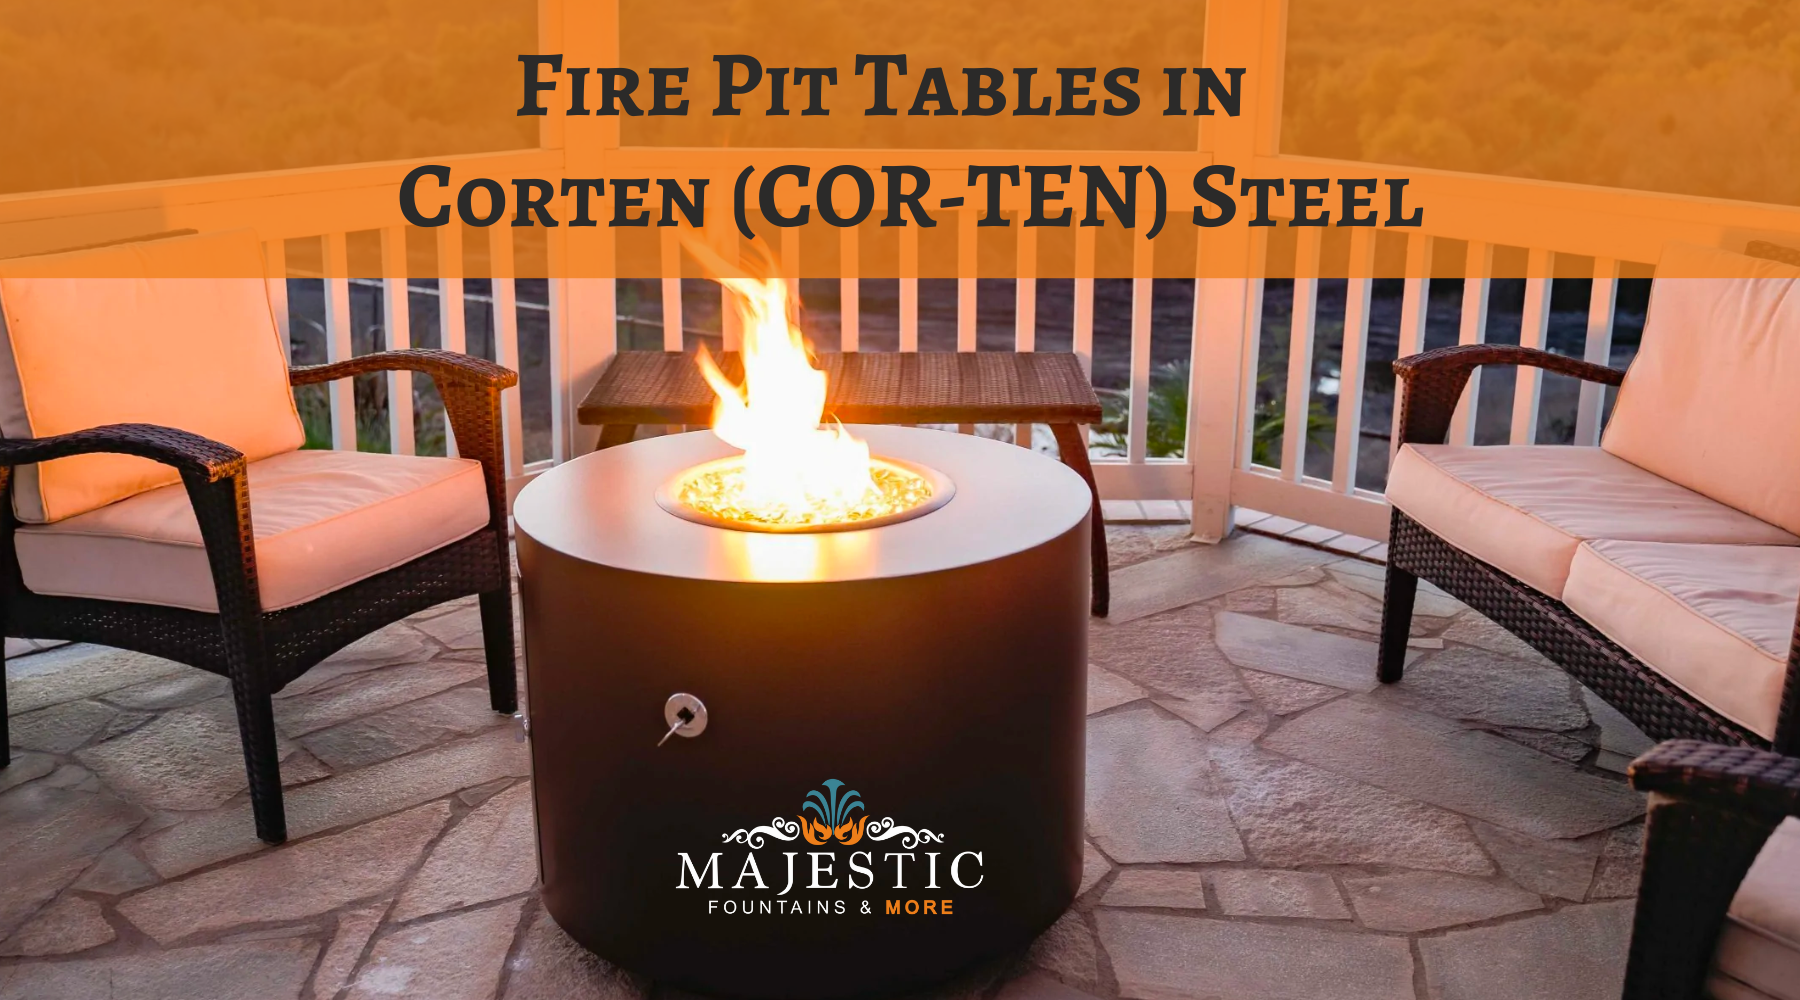 All About Corten (COR-TEN) Steel Fire Pit Tables